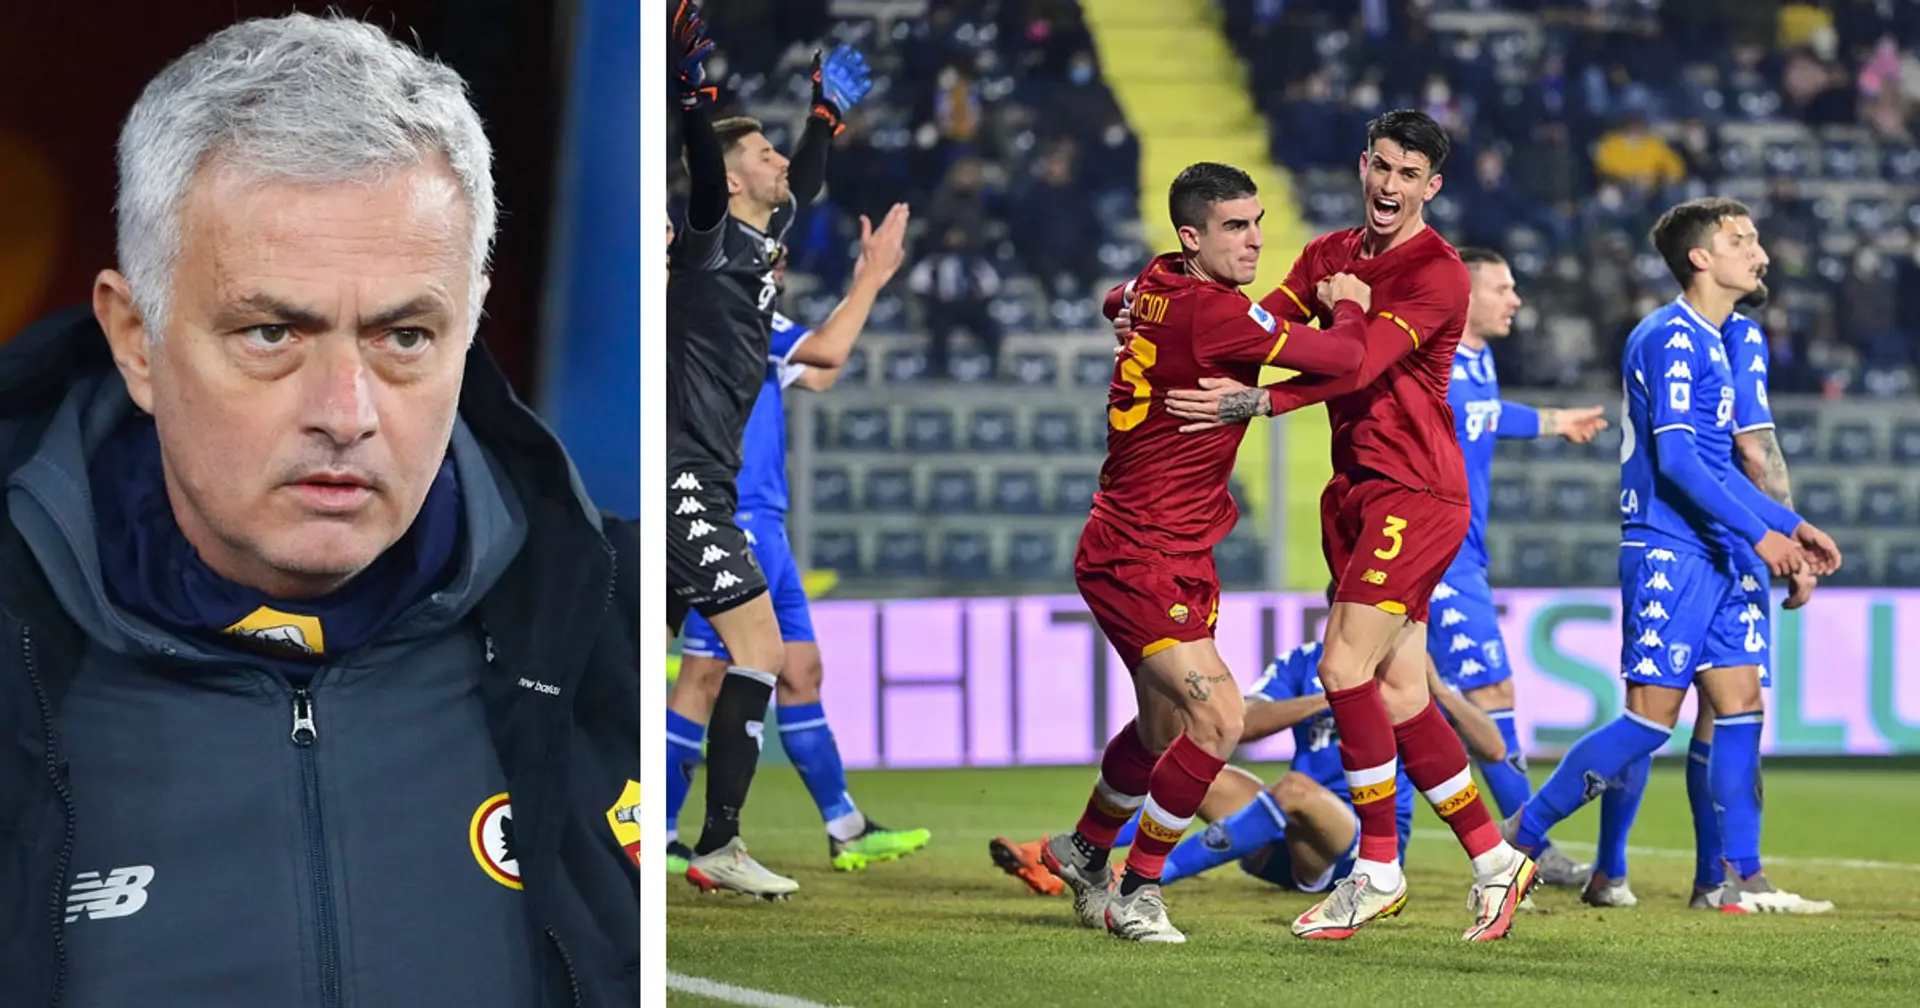 'We did it for the audience': Mourinho gives hilarious reason why Roma allowed Empoli score twice in crushing 4-2 win